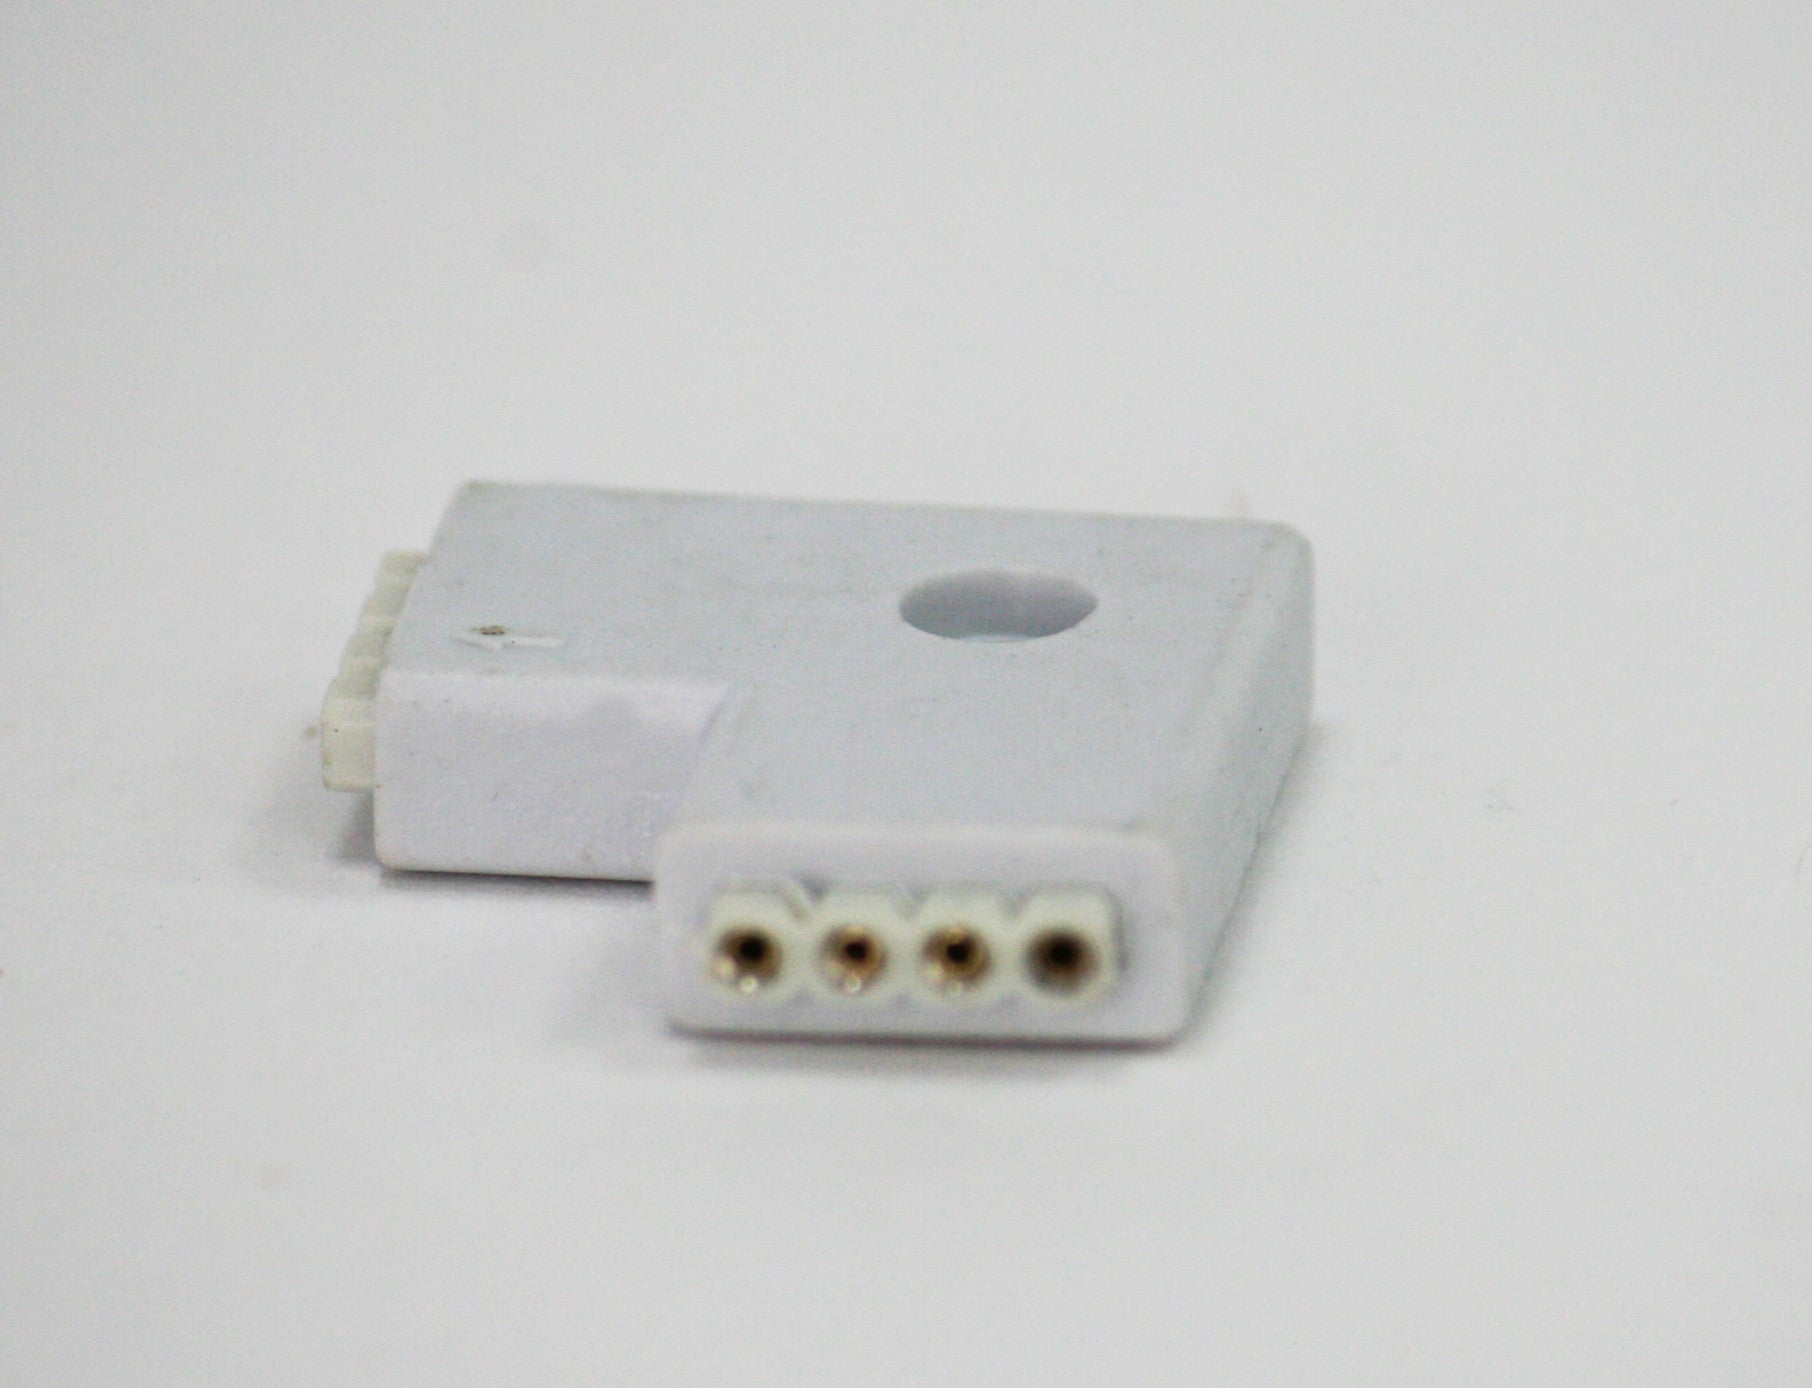 4 PIN L-Shape Right Angle Female Connector For LED RGB Strip Light